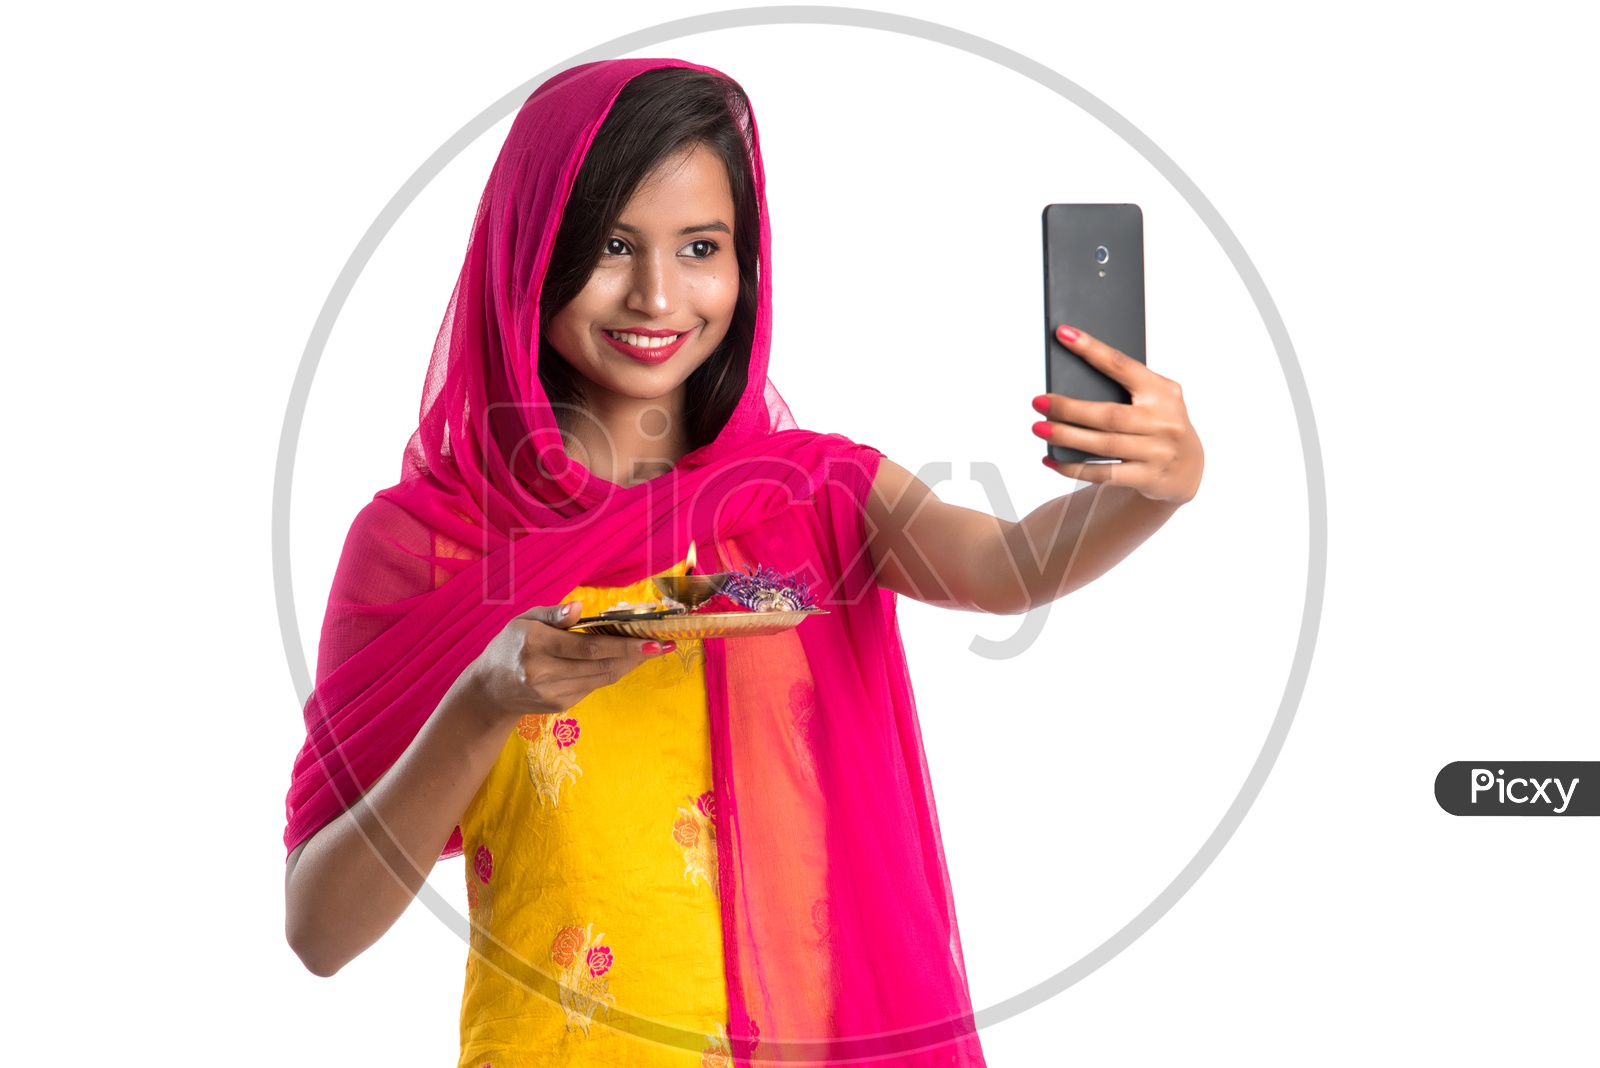 Beautiful Indian Girl Holding Pooja Thali Or Pooja Plate  In Hand and Taking Selfie with Smart Phone